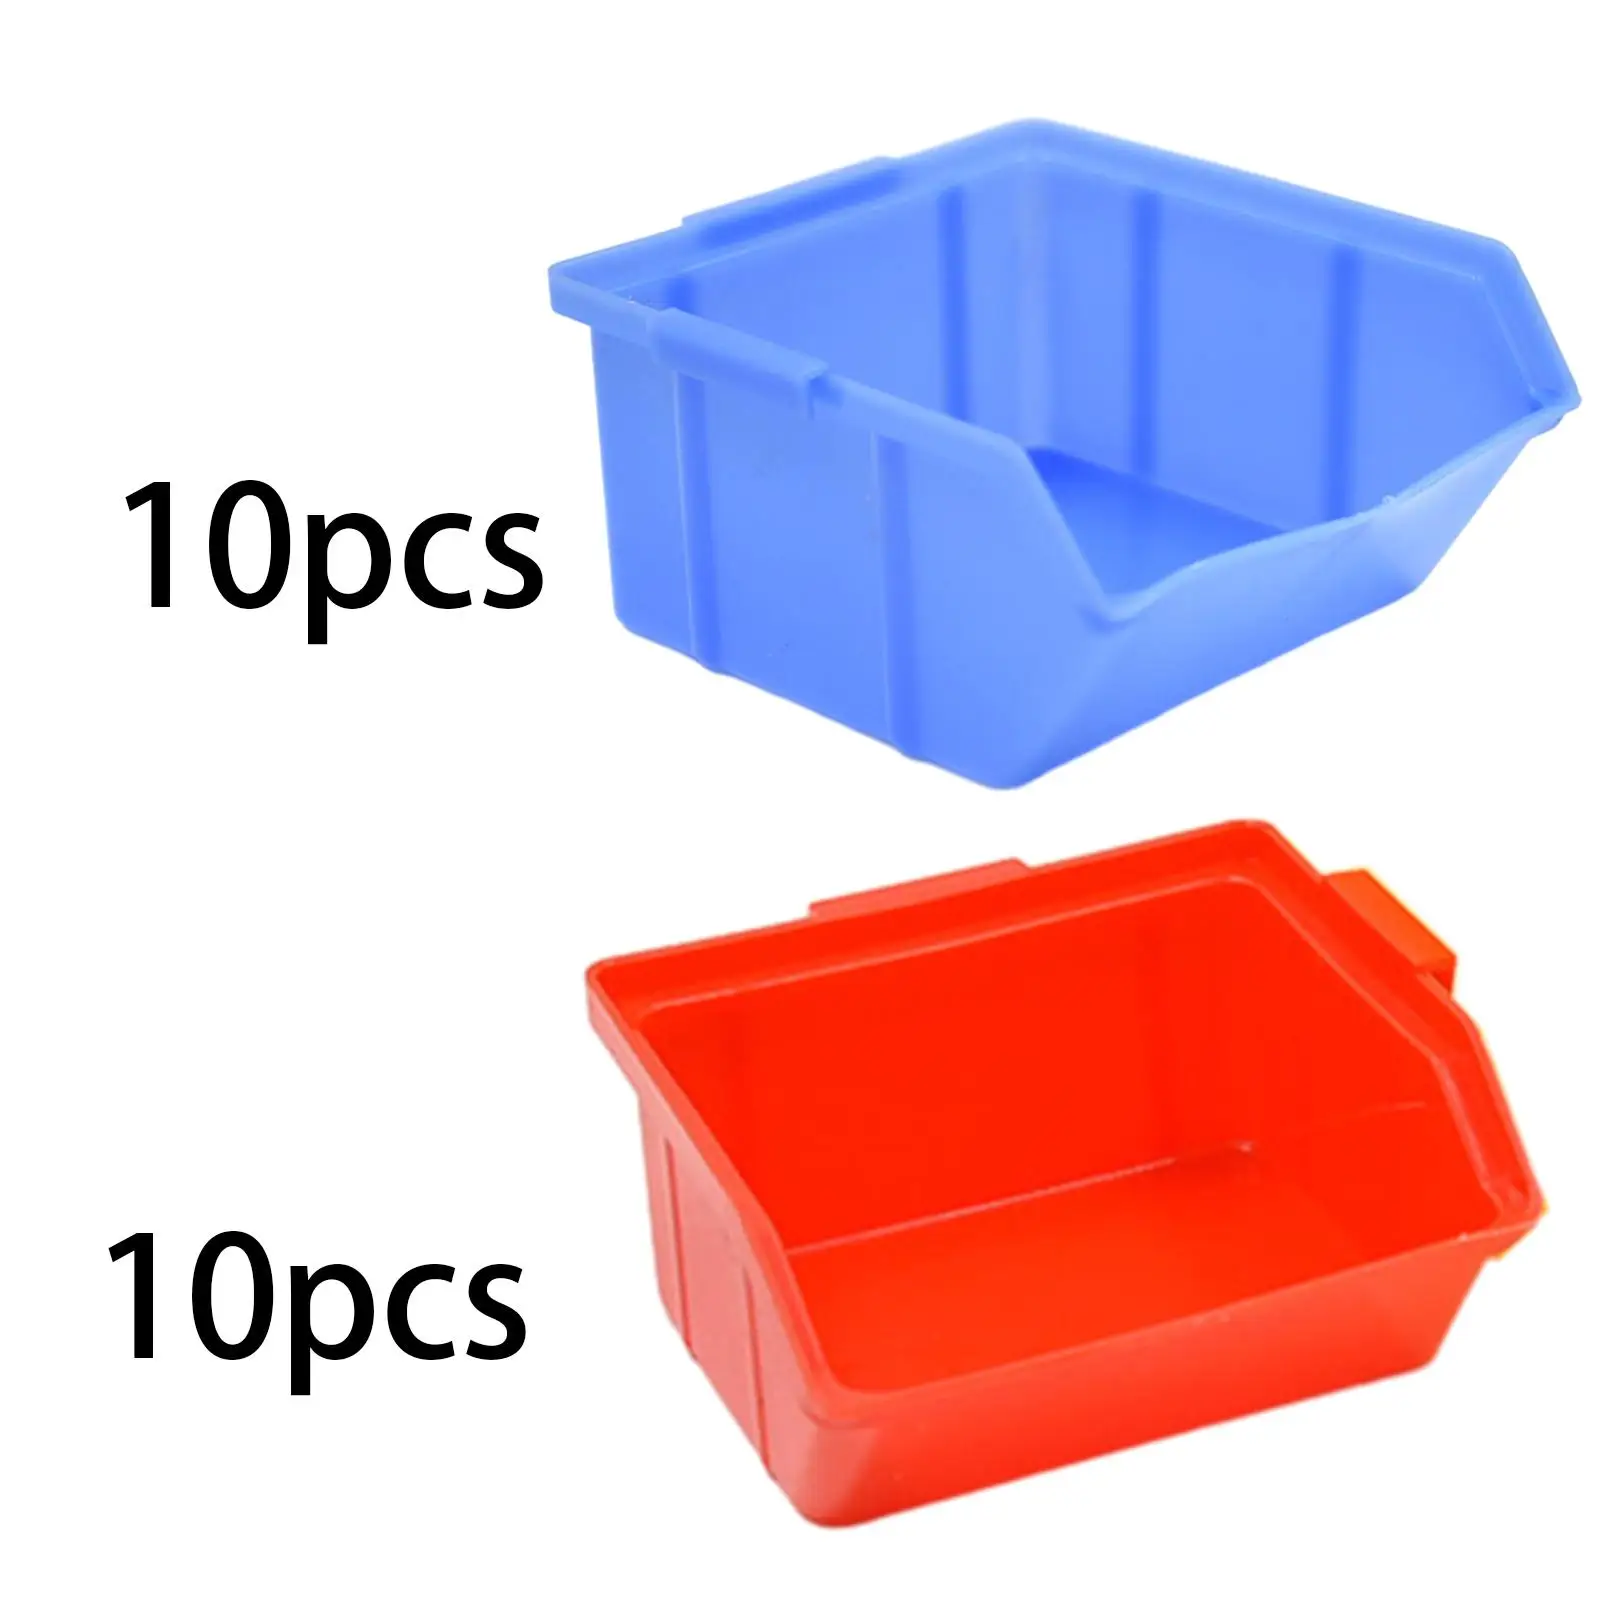 https://ae01.alicdn.com/kf/S25b32cf0a89f432d9fafa46973c9e0c0g/10Pcs-Heavy-Duty-Nail-and-Screw-Organizer-Stackable-Storage-Bin-Container-Hanging-Stacking-Containers-for-Workshop.jpg